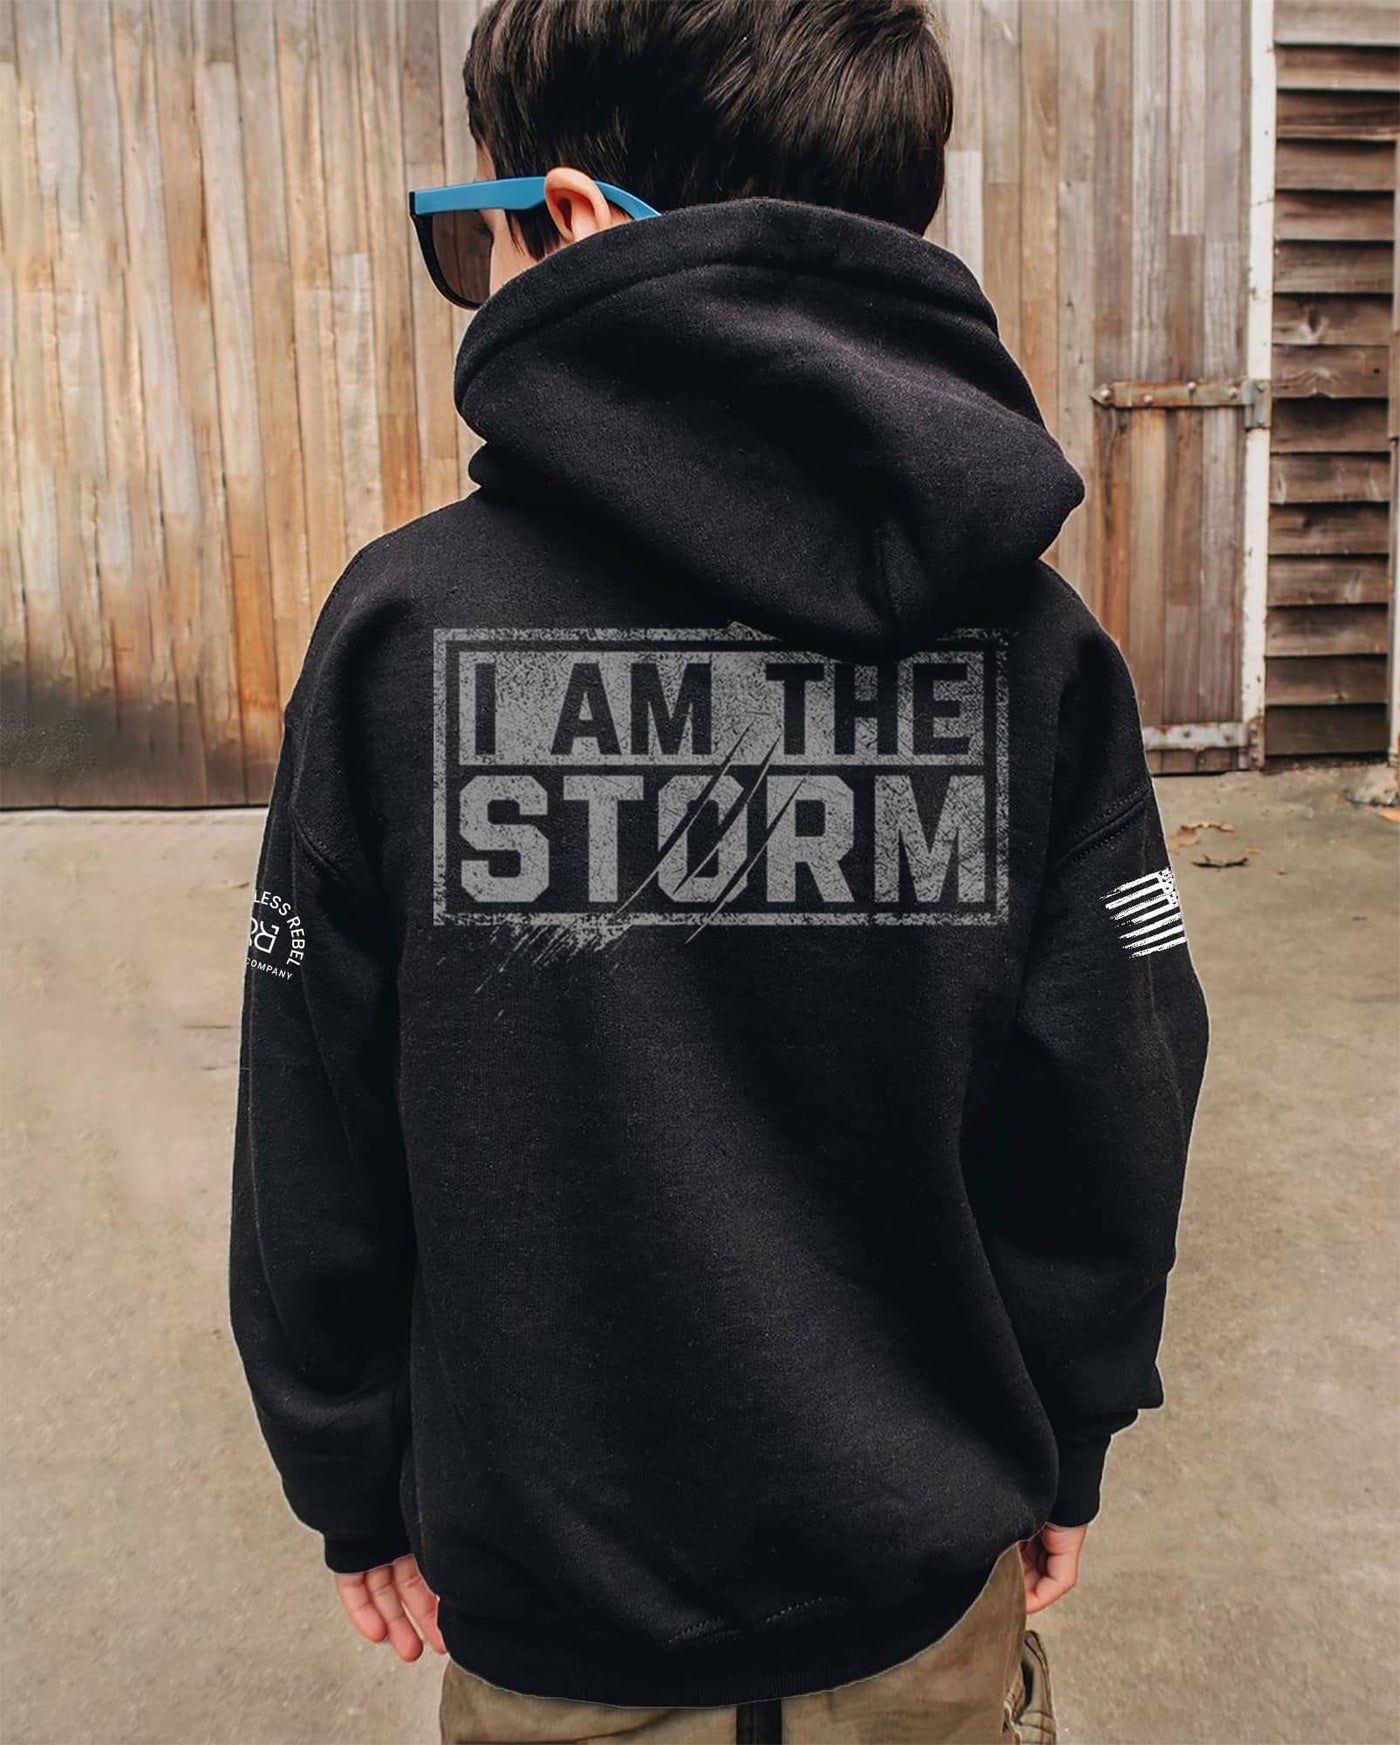 Boy wearing Solid Black Youth I Am The Storm Back Design Hoodie